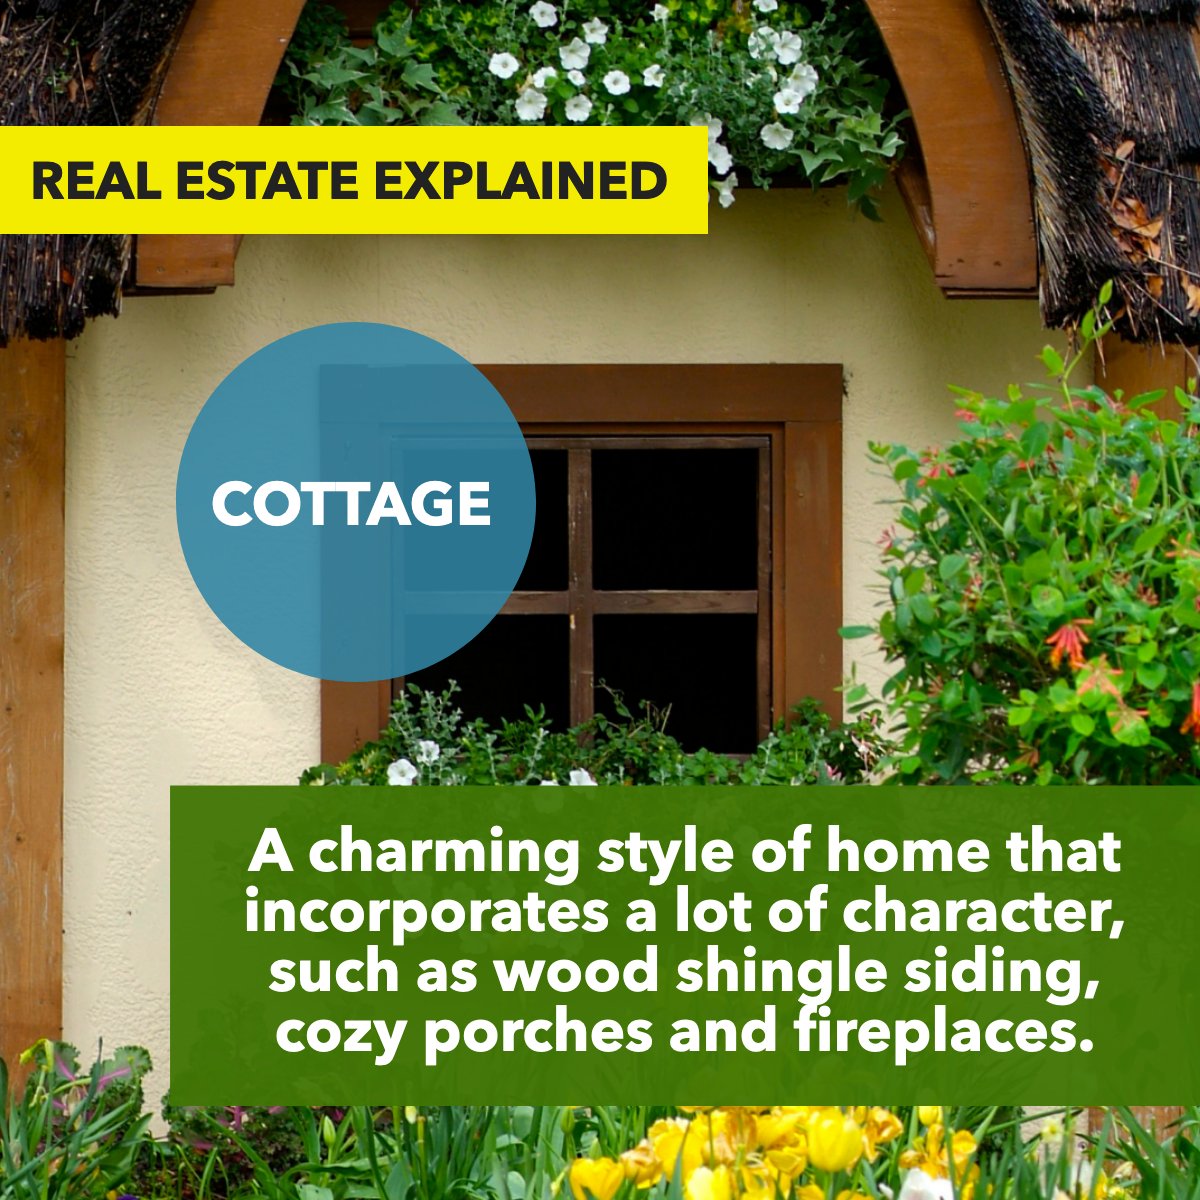 Did you know what a Cottage is? 🤔 

Is this the type of house that you like?

#cottagehome #cottagedecor #cottagestyledecor
 #thehelpfulagent #home #houseexpert #house #mls #househunting #realestate #realtor #broker #realestateagent #happyhome #happyhomeowners